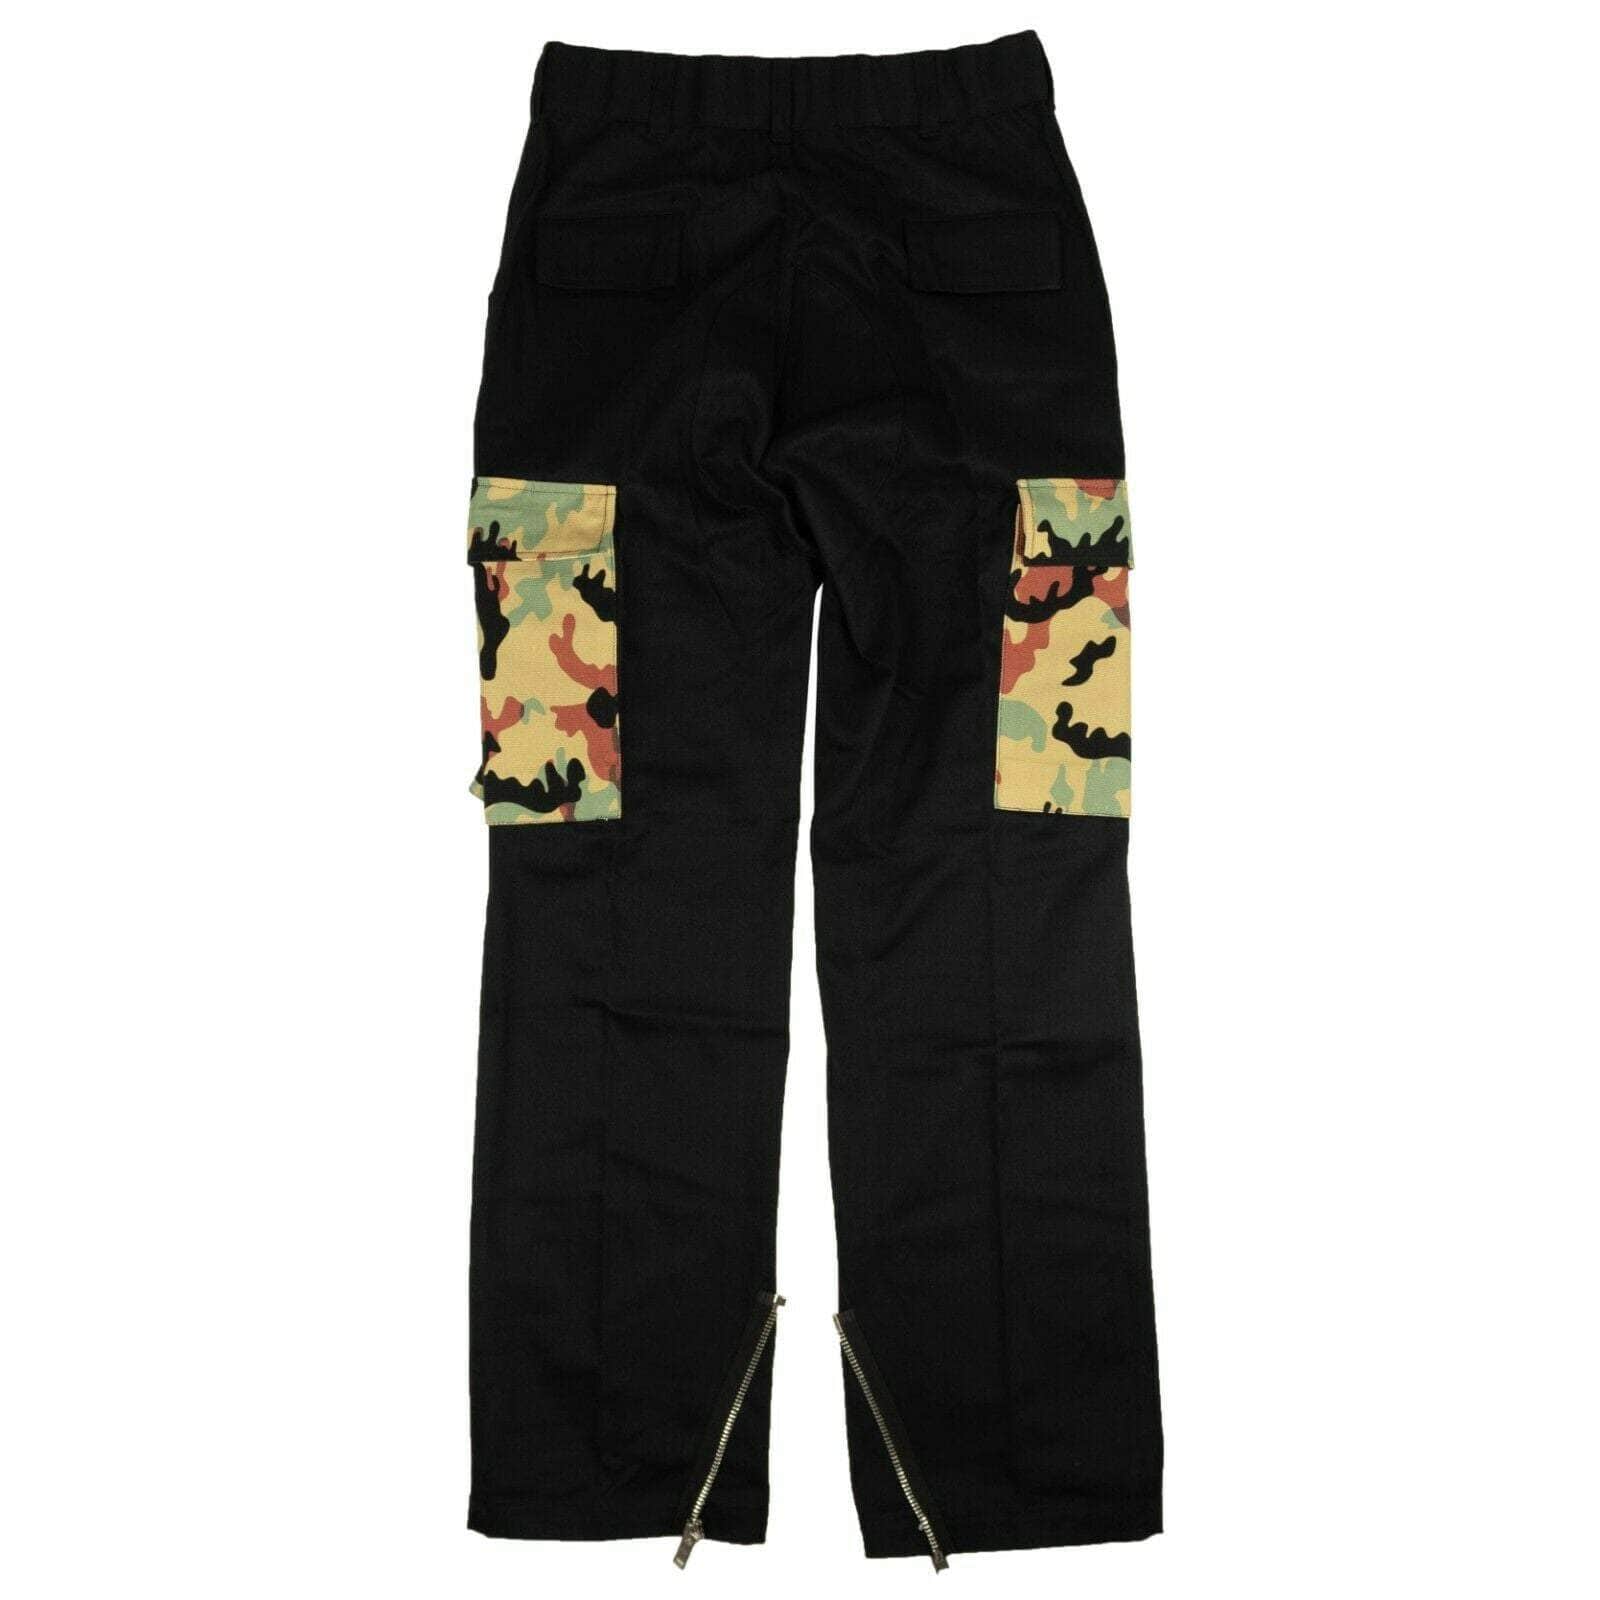 424 ON FAIRFAX 250-500, 424-on-fairfax, channelenable-all, chicmi, couponcollection, gender-mens, main-clothing, mens-cargo-pants, size-l Black Brown  And Green Camo Cargo Pants